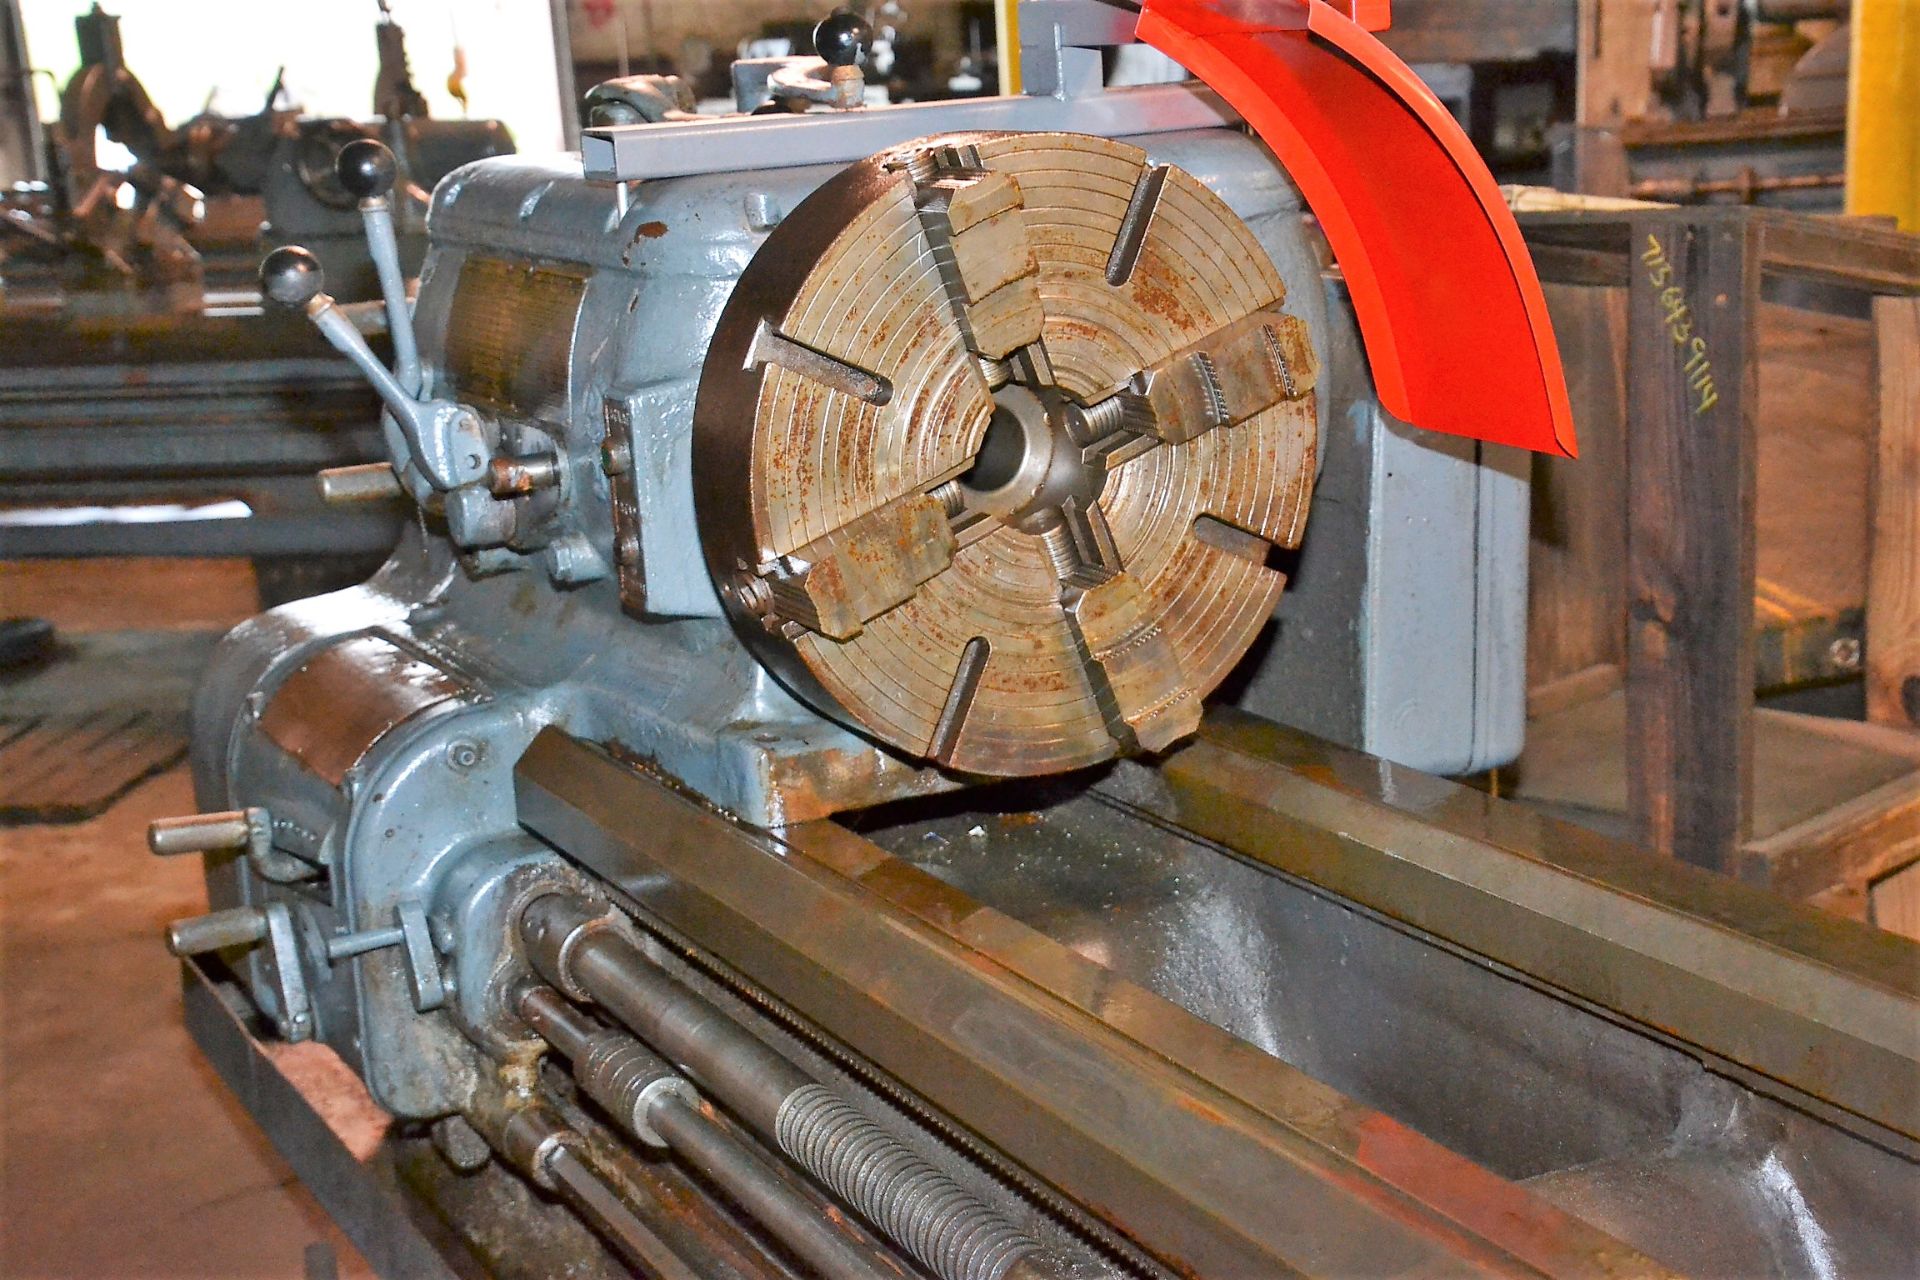 ENGINE LATHE, AXELSON, 20” X 120”, WITH 18" 4 JAW CHUCK, TAPER ATTACHMENT, TAILSTOCK, (2) STEADY - Image 2 of 2